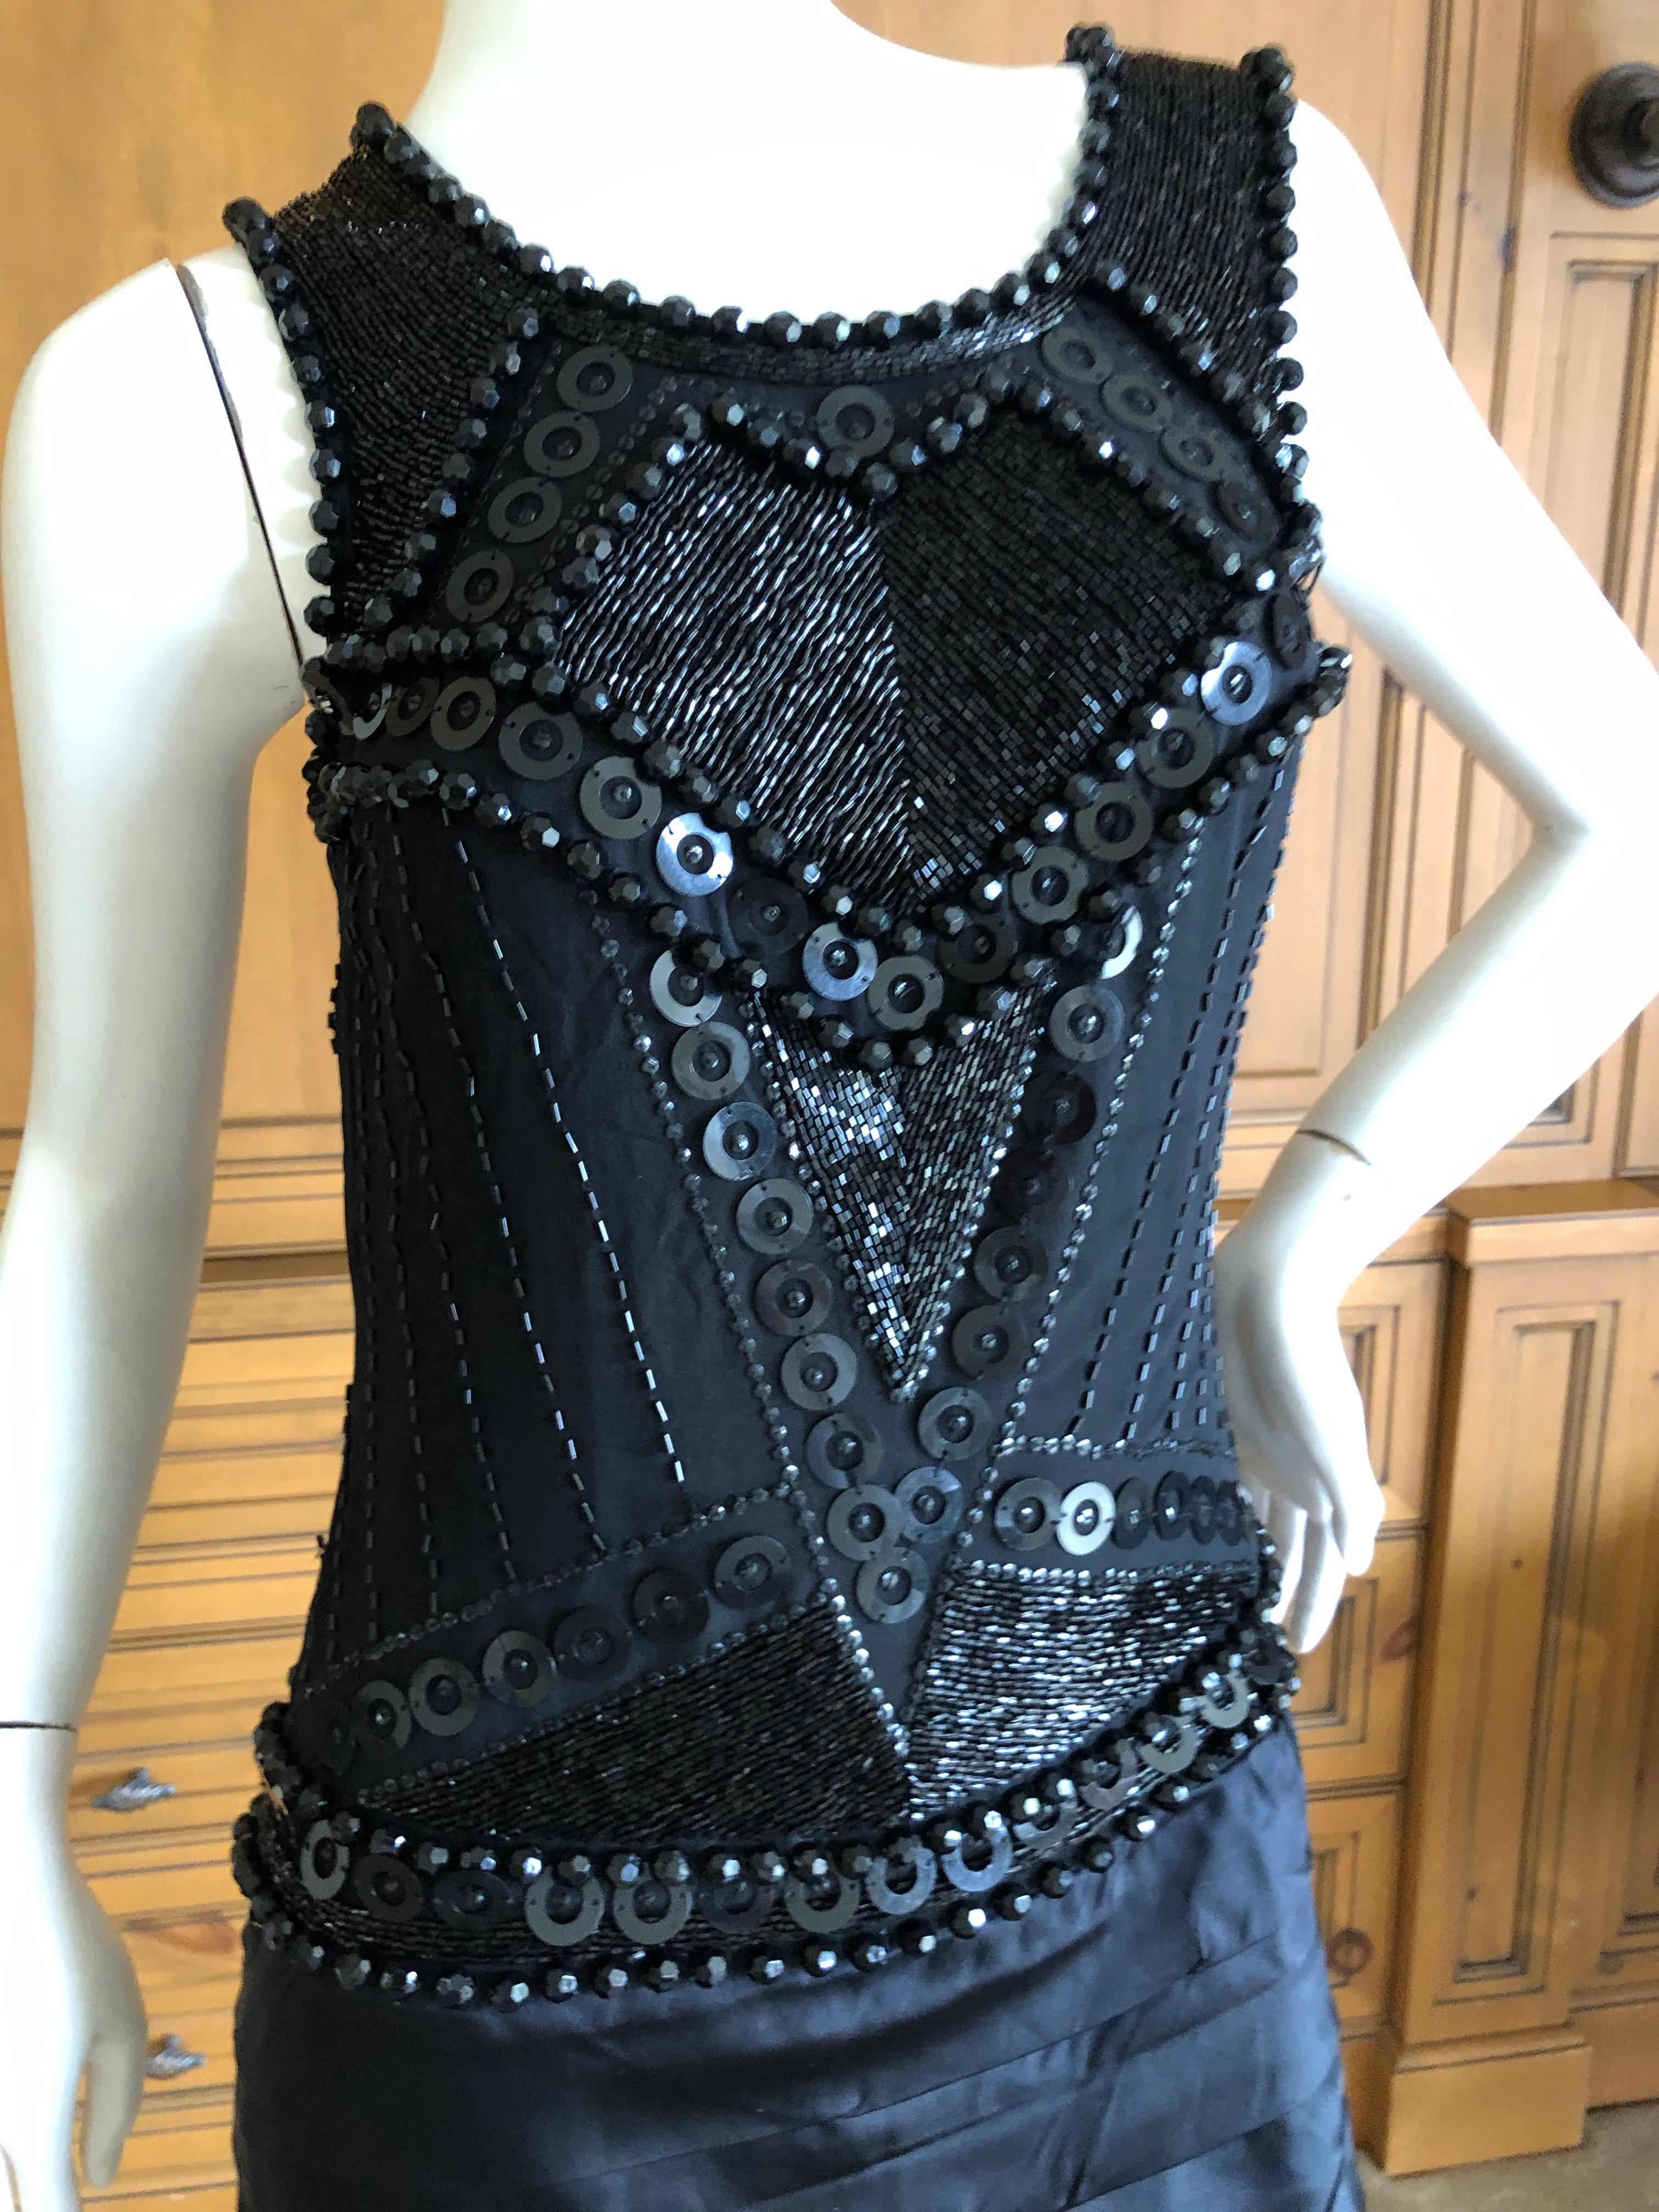 Roberto Cavalli for Just Cavalli Jet Embellished Vintage Black Silk Mini Dress.
This is amazing, the faceted jet beads are glass, wonderful tactile movement with this.
Size 40
Bust 35